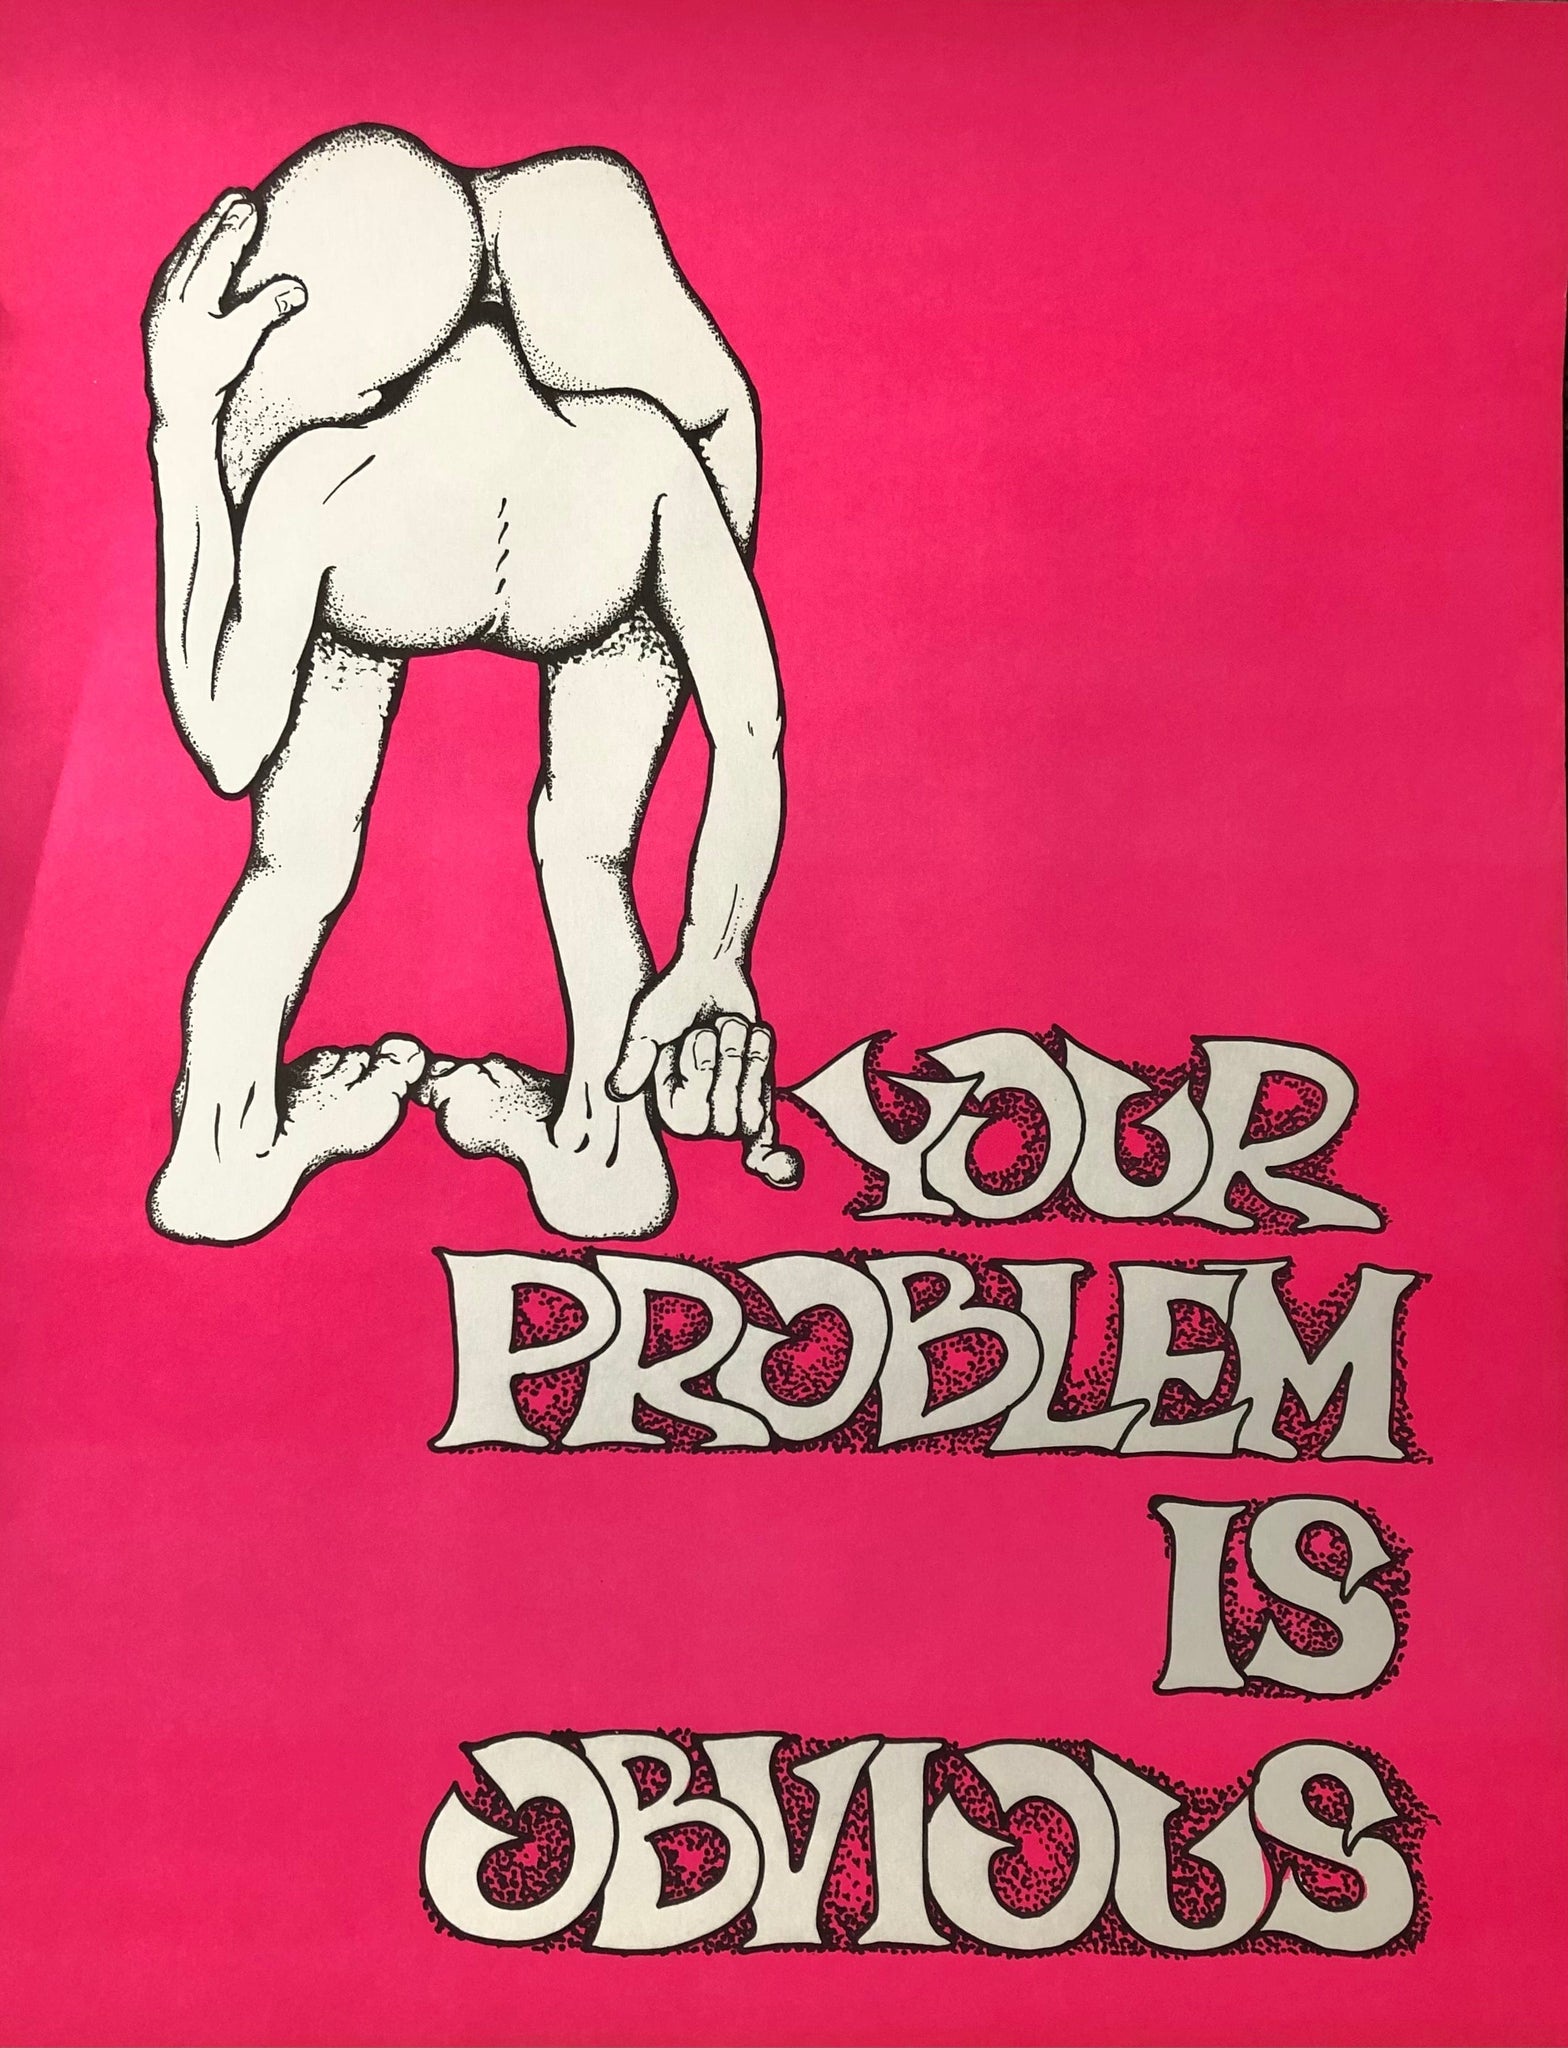 Your Problem is Obvious, 1970s